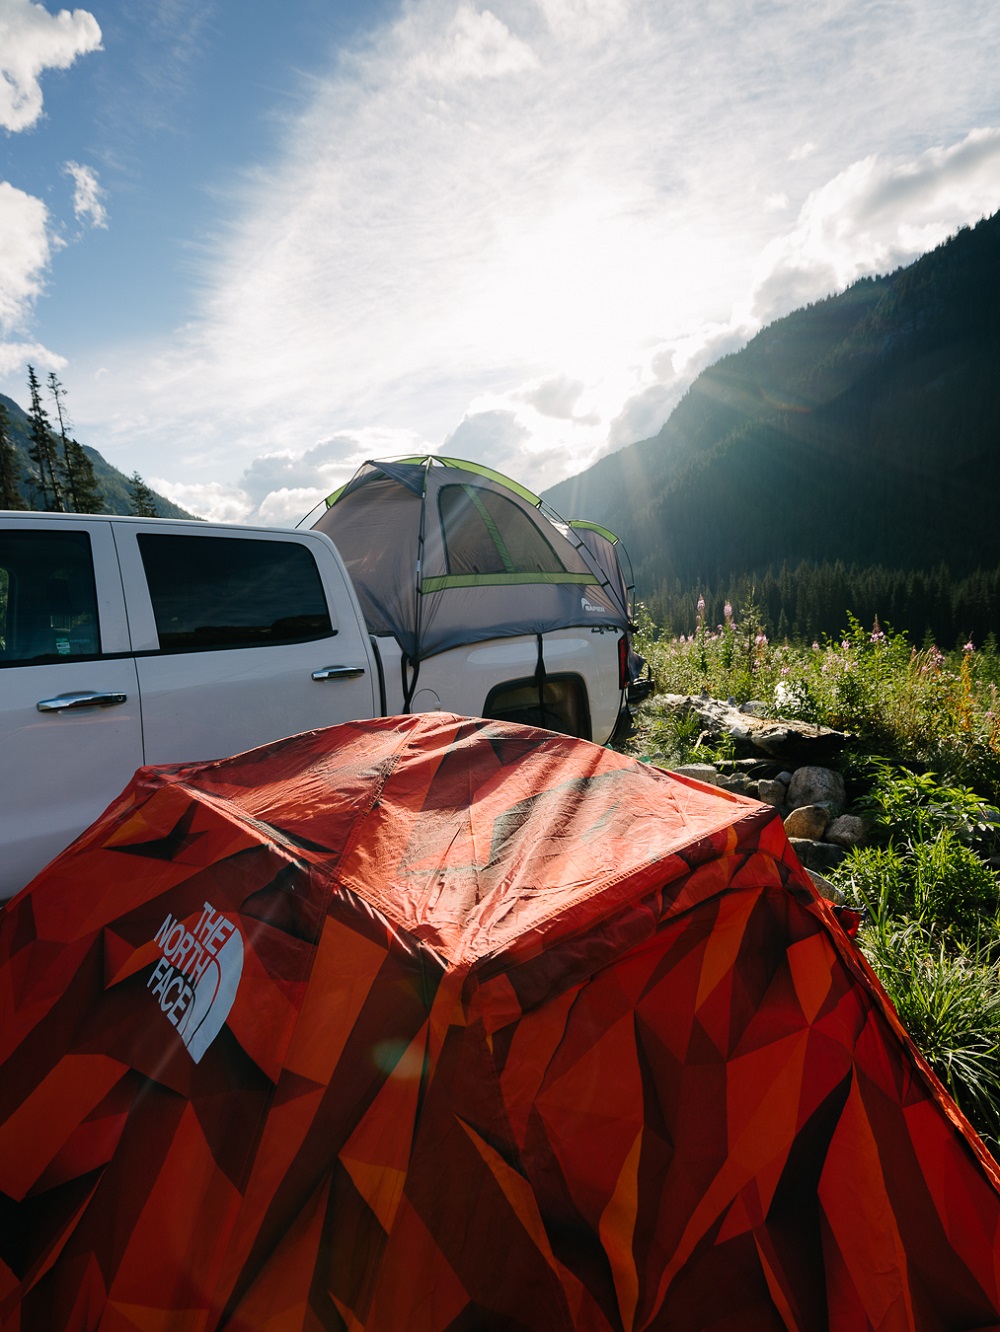 "Adventuring in my truck means that I can maximize time in the outdoors but minimize time driving. I love waking up to alpine sunrises and opening up the top windows to the stars at night." Photos: Aga Iwanicka